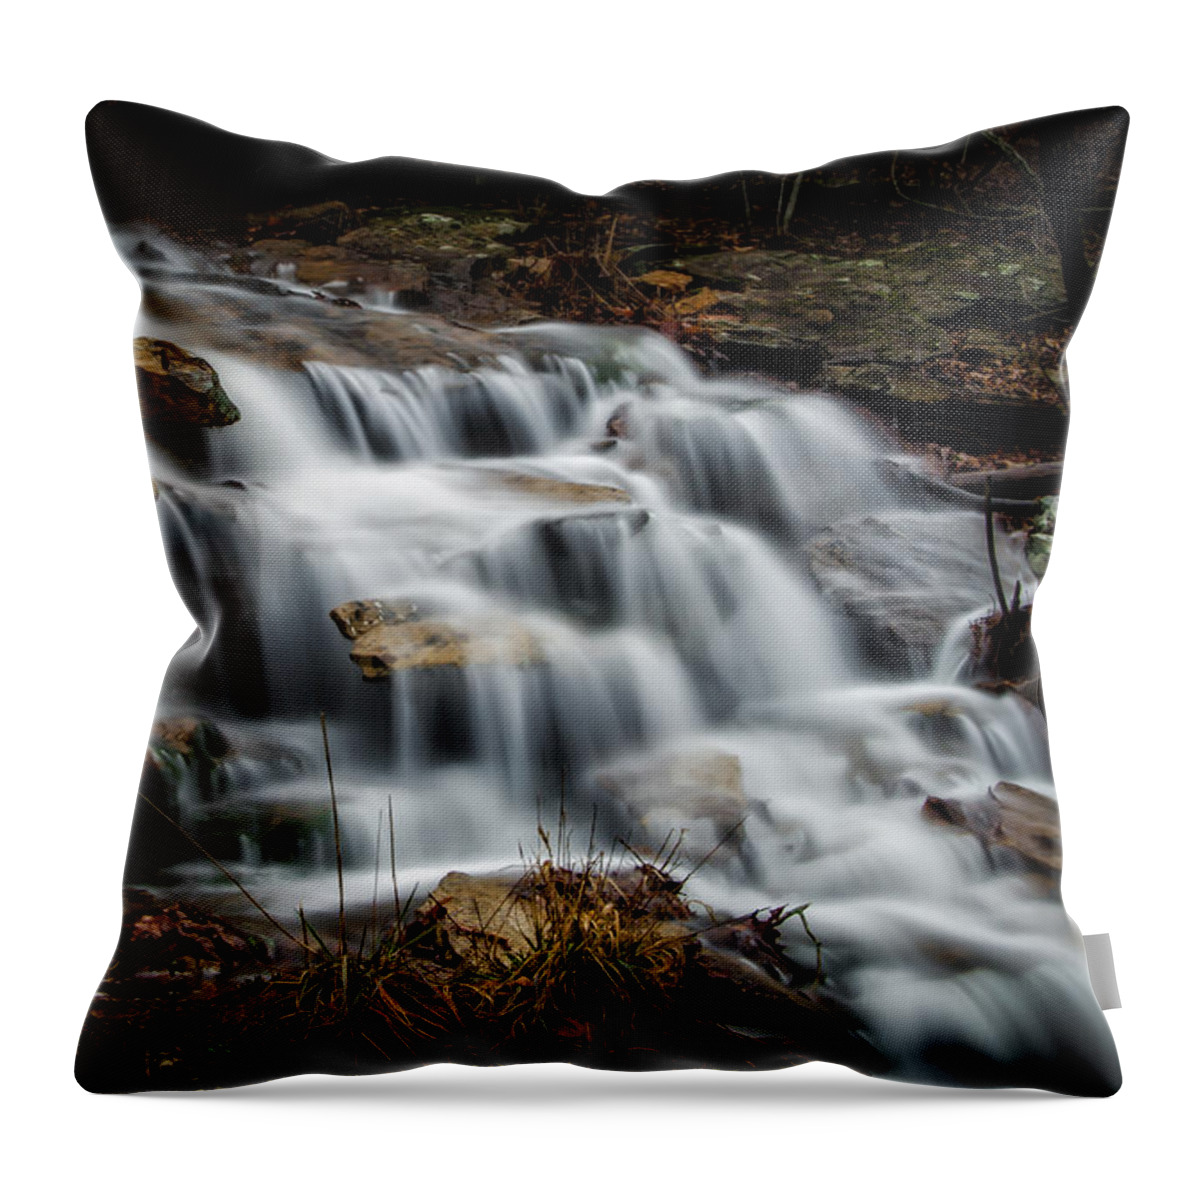 Mt. Magazine State Park Throw Pillow featuring the photograph Mt. Magazine Cascade by James Barber